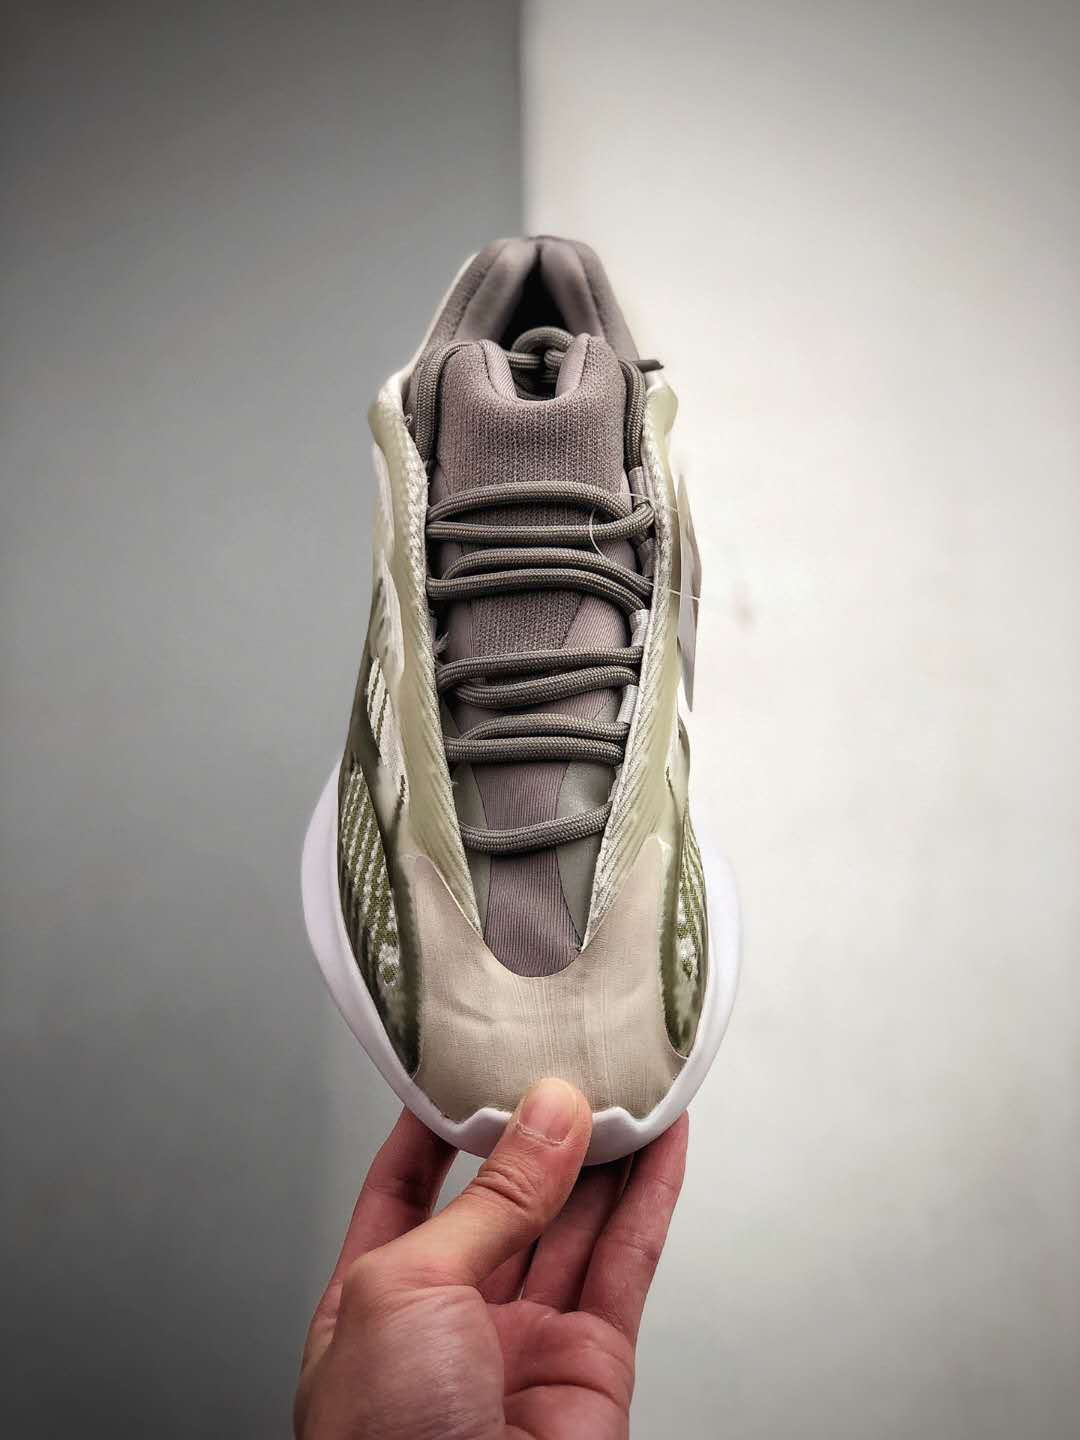 Adidas Yeezy Foam Runner Boost 700 V3 EF9899 - Shop the Latest Release Today!